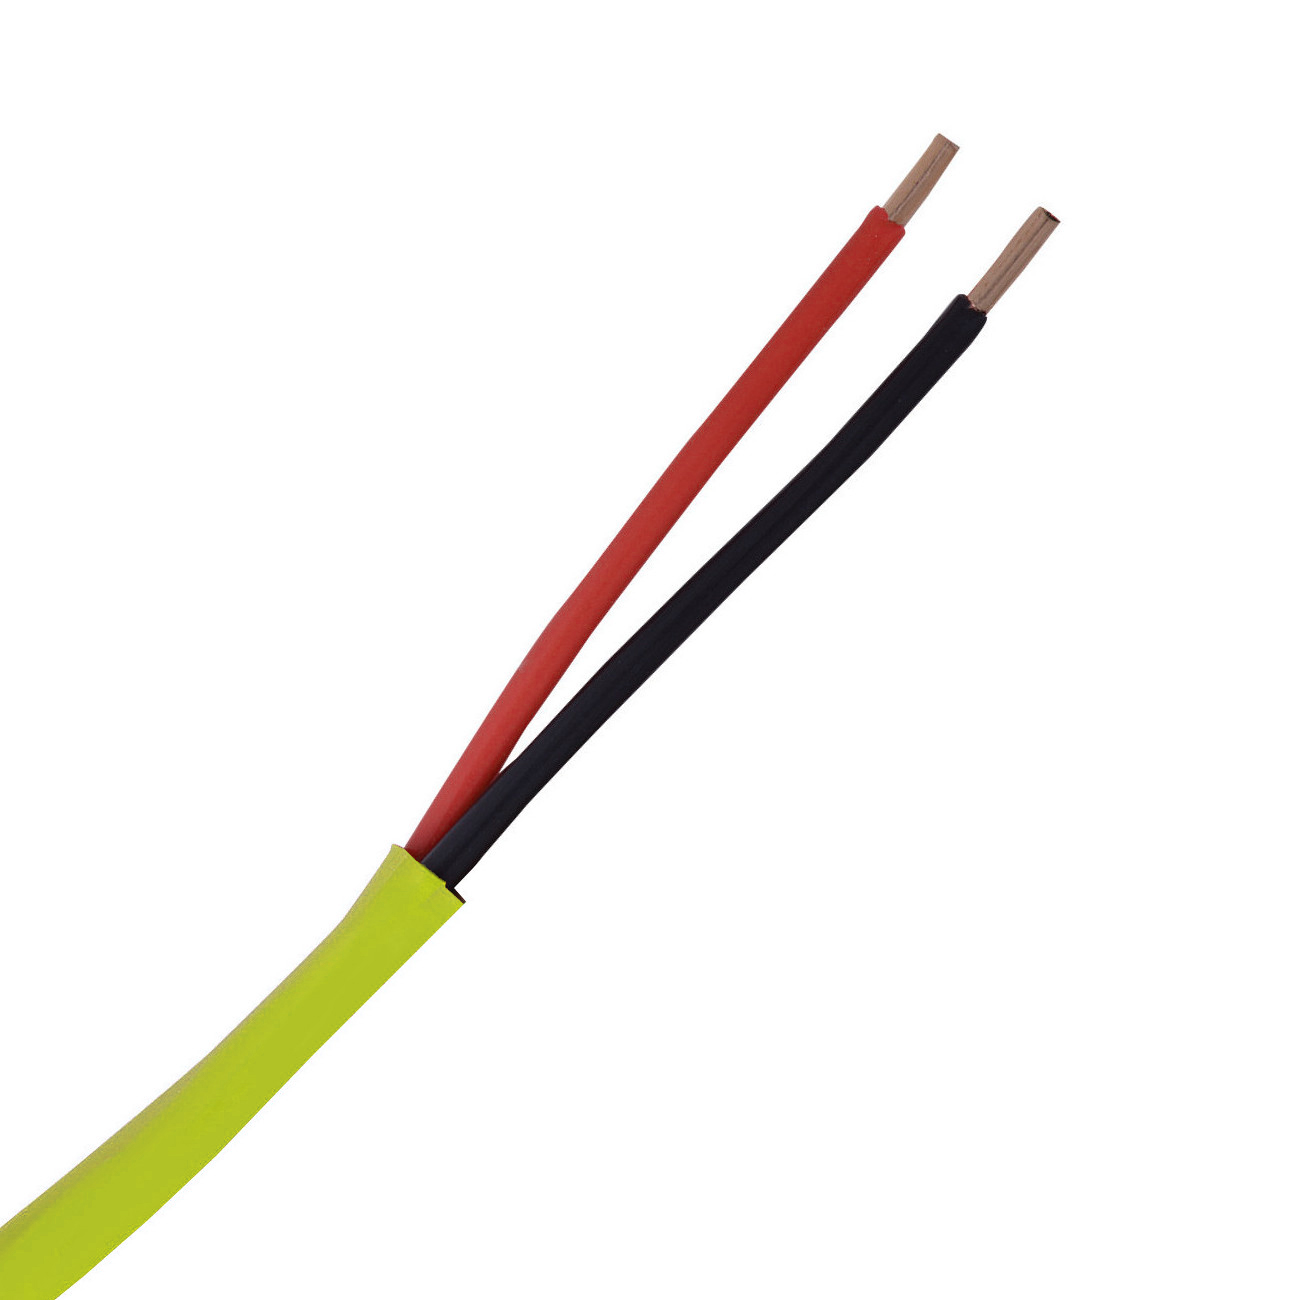 159632YL - Fire Alarm Wire - Yellow - 14 AWG/2 Conductor, Plenum (FPLP), Unshielded, Solid Bare Copper, 1000ft